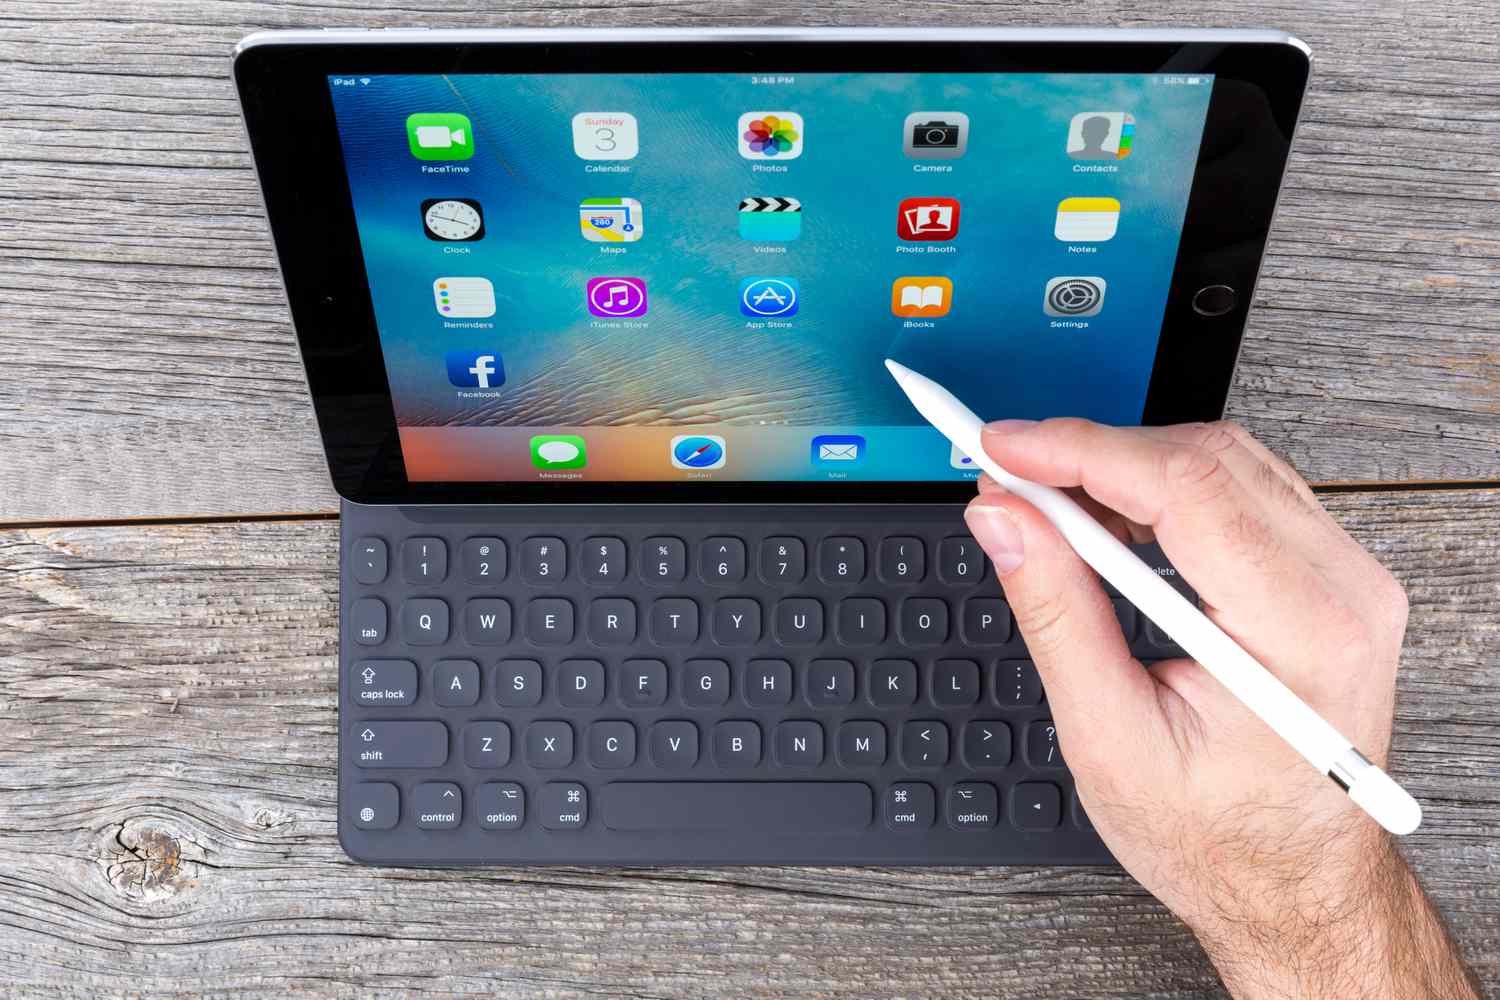 How To Connect A Wireless Keyboard To IPad